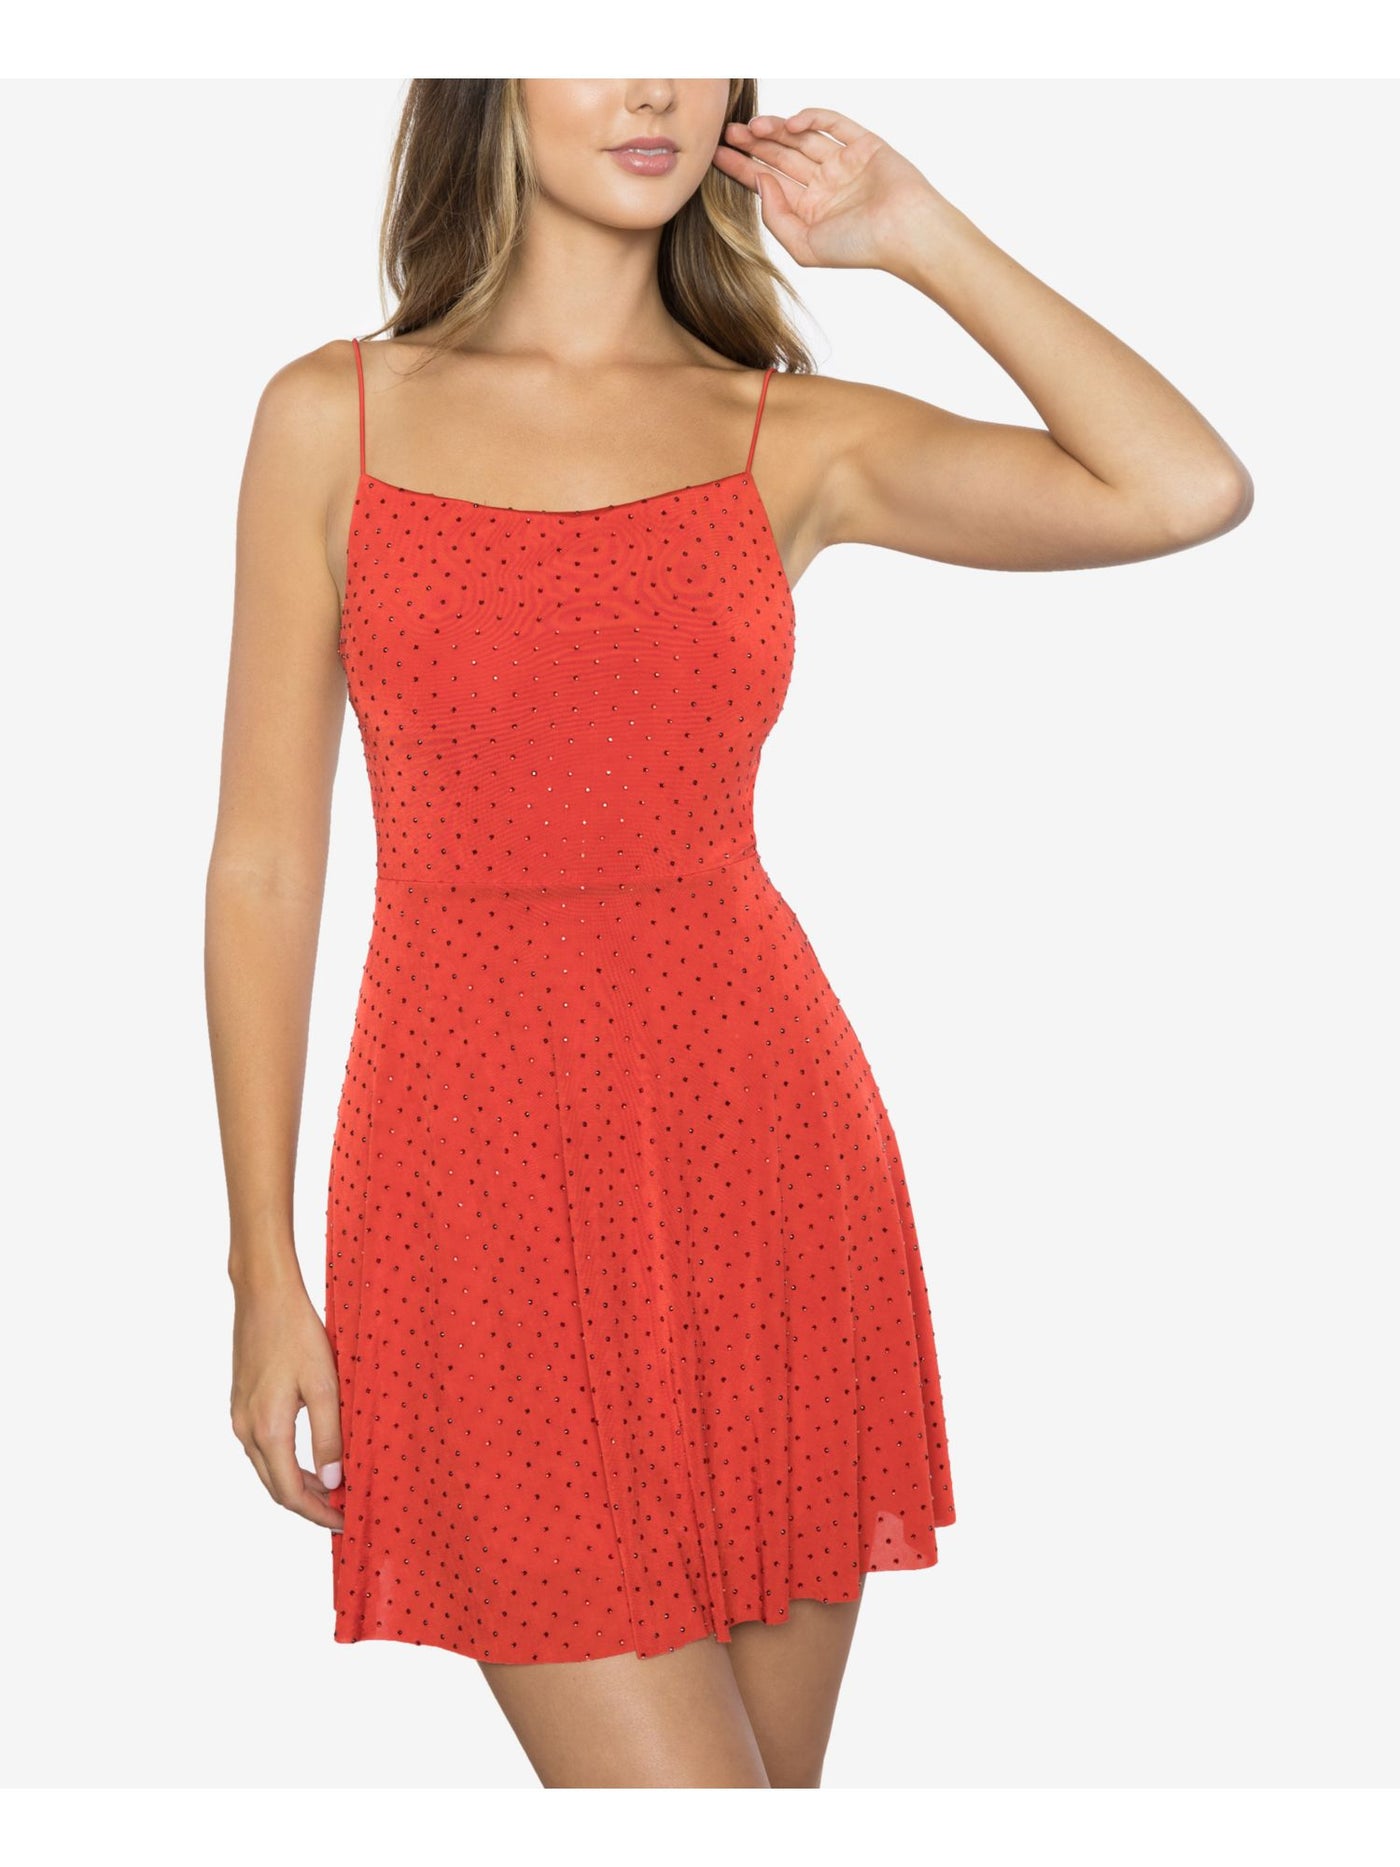 B DARLIN Womens Red Embellished Spaghetti Strap Square Neck Short Party A-Line Dress Juniors 3\4